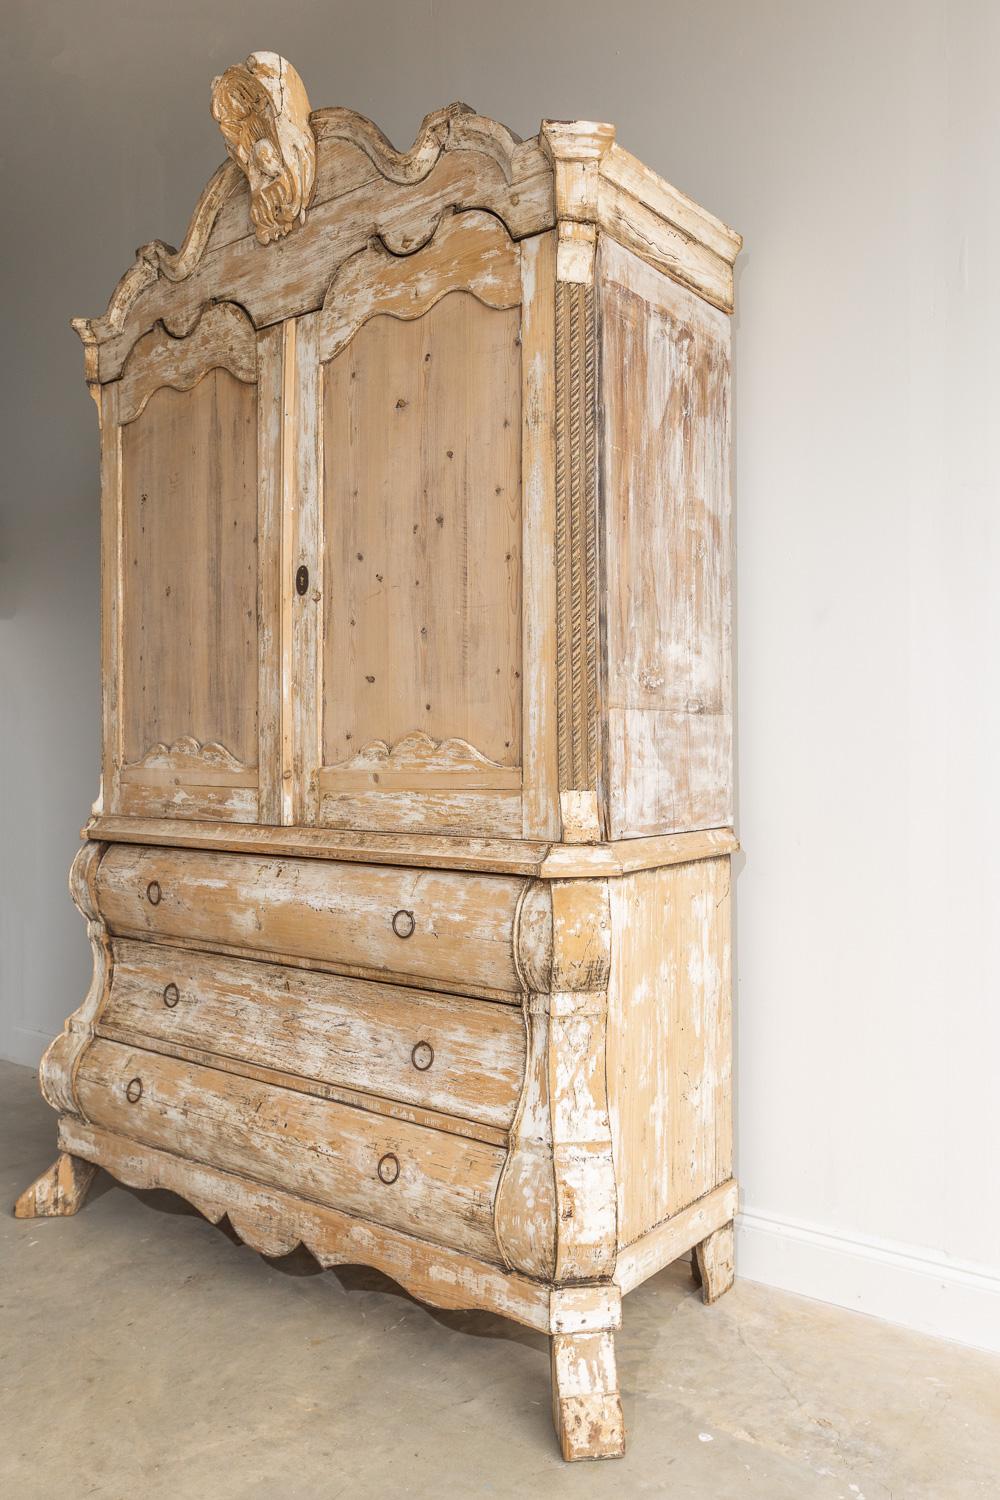 This beautiful 18th Century Dutch Bombay credenza has curves and details that are unlike any other piece. This enfilade is made of dry scraped pine and has a beautiful carved crest at the very top. There are also lovely carved roping details on the